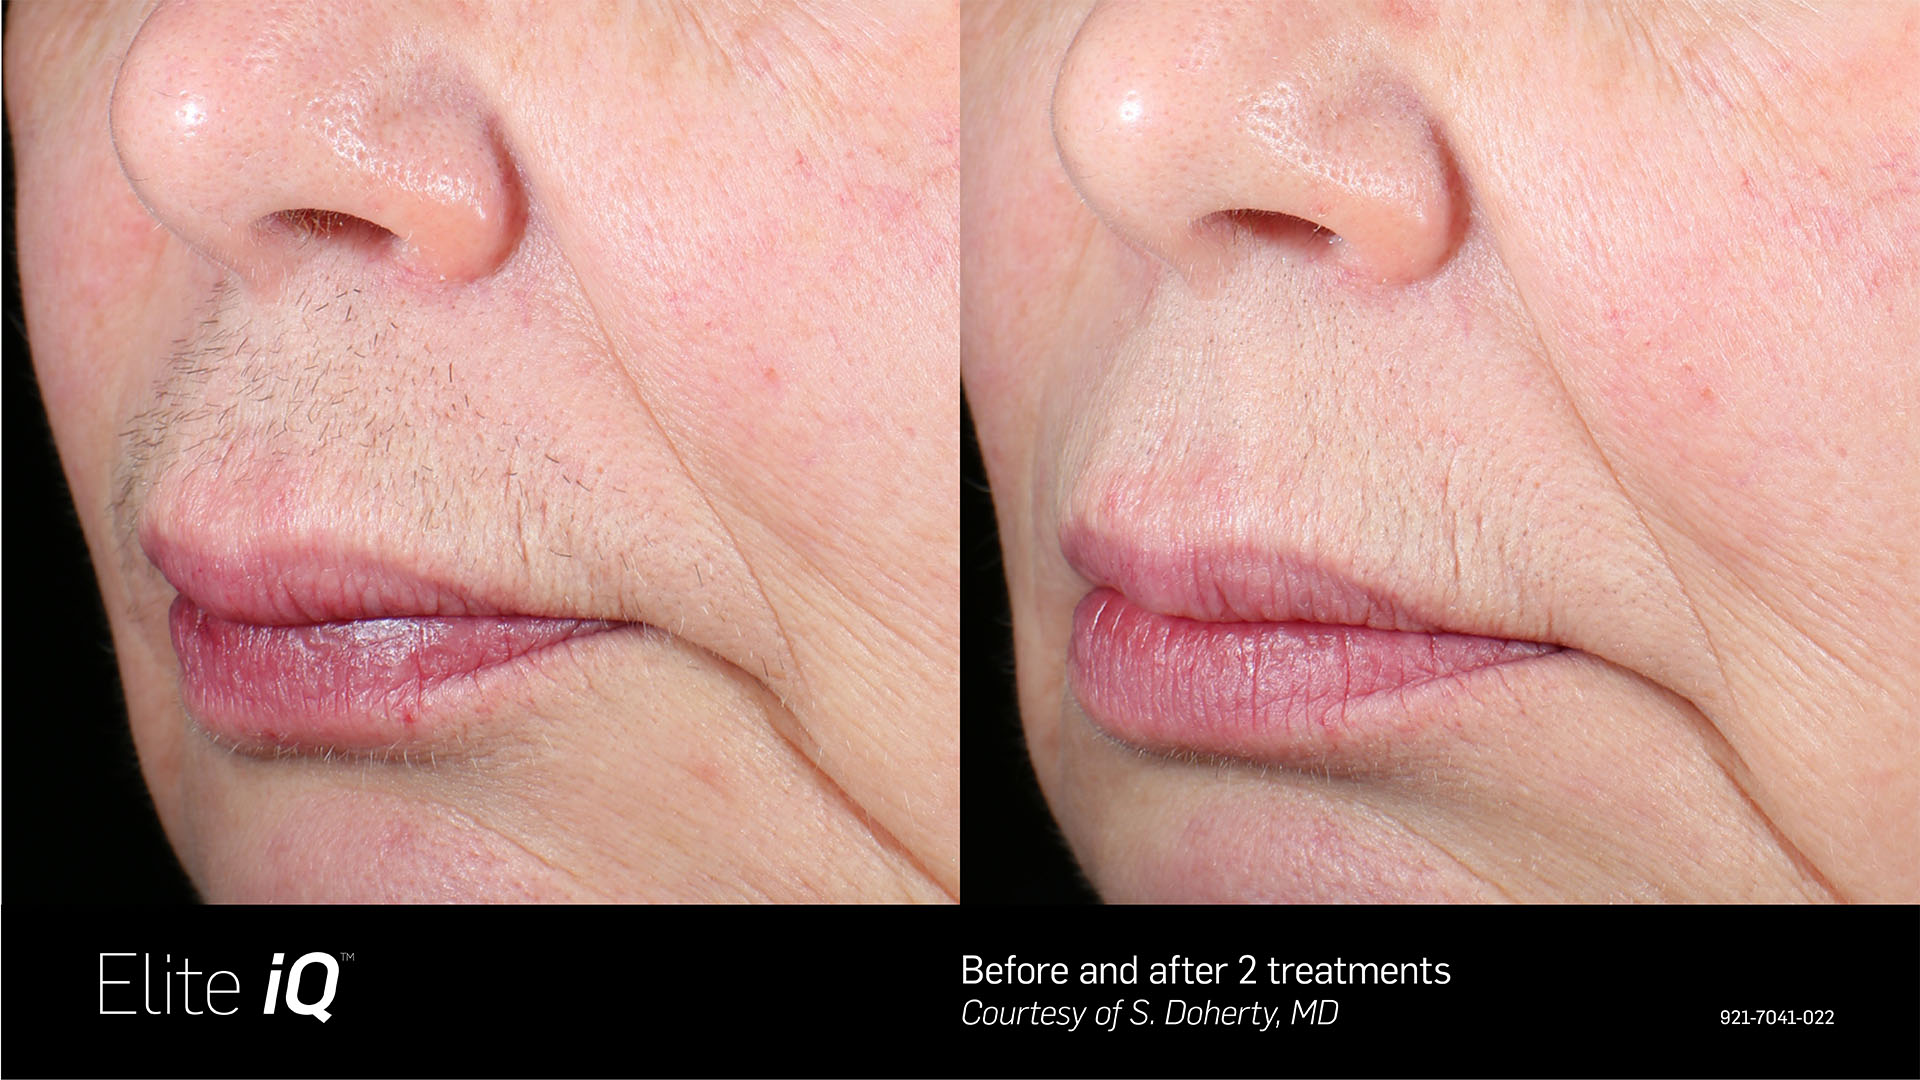 Side profile before and after photo showing a woman's upper lip with hair before and smoother, more hairless skin after Elite IQ laser hair removal treatment in St. Petersburg.